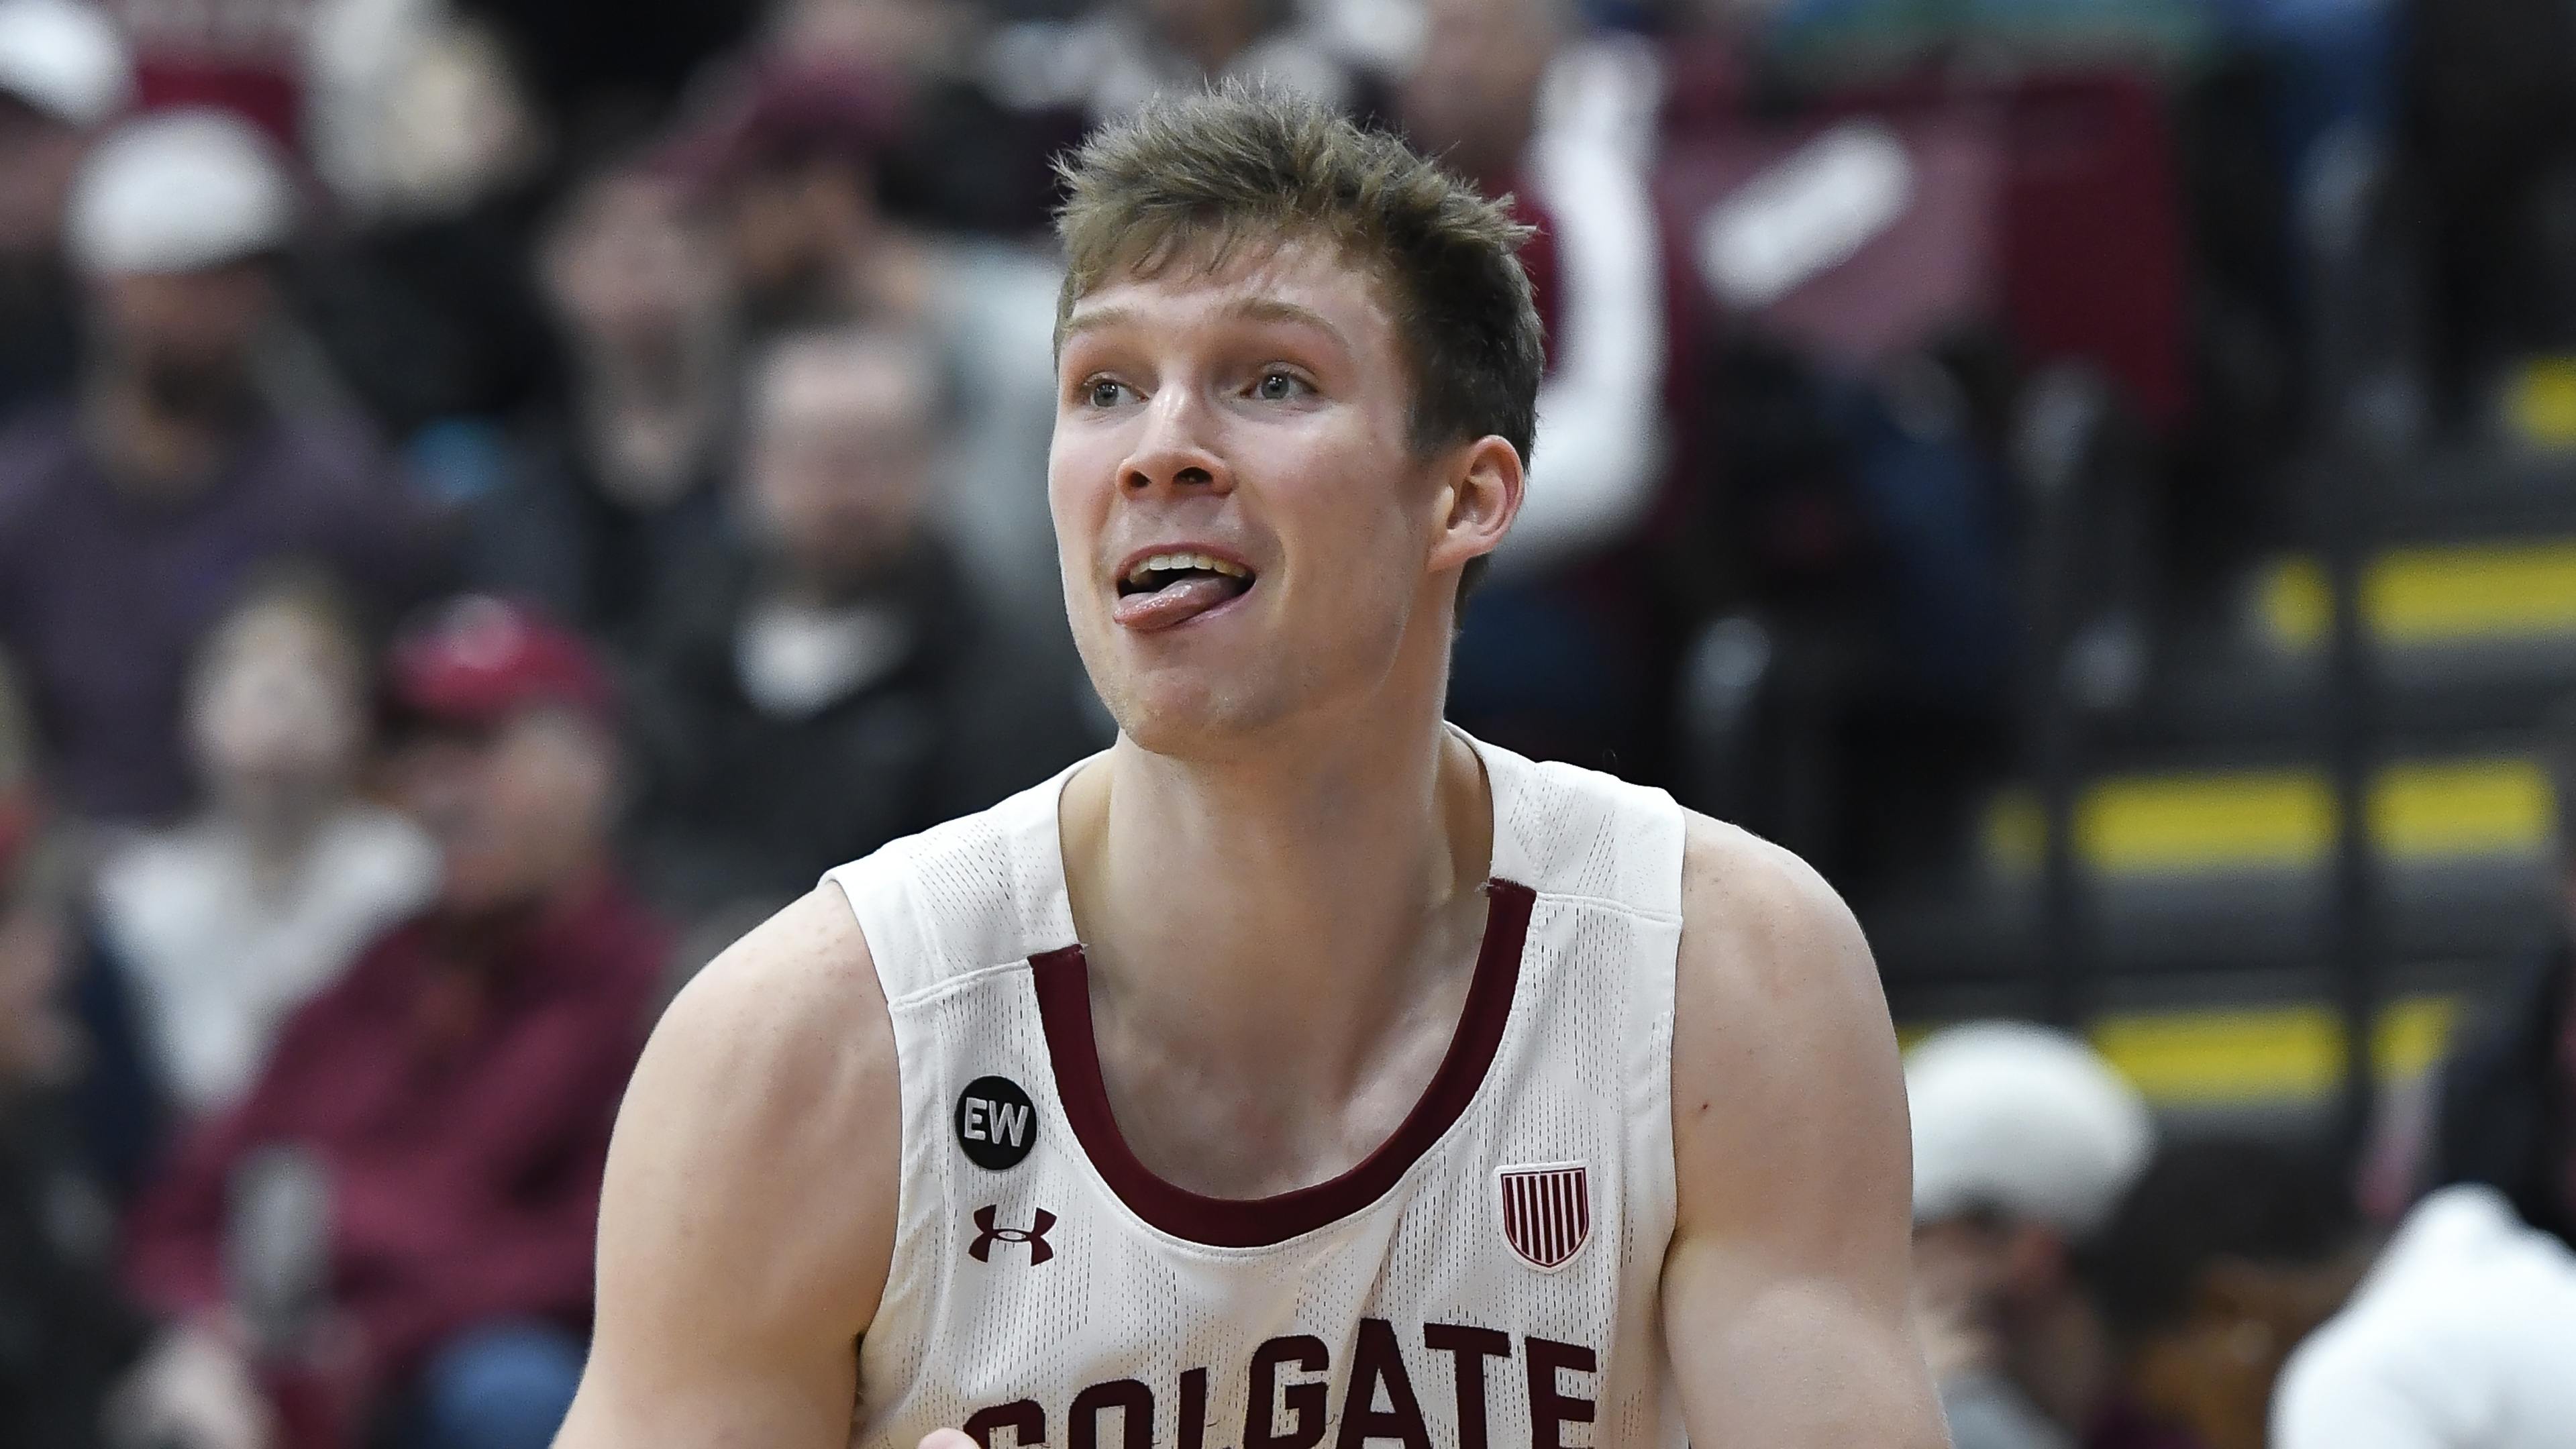 How to watch No. 15 Colgate vs